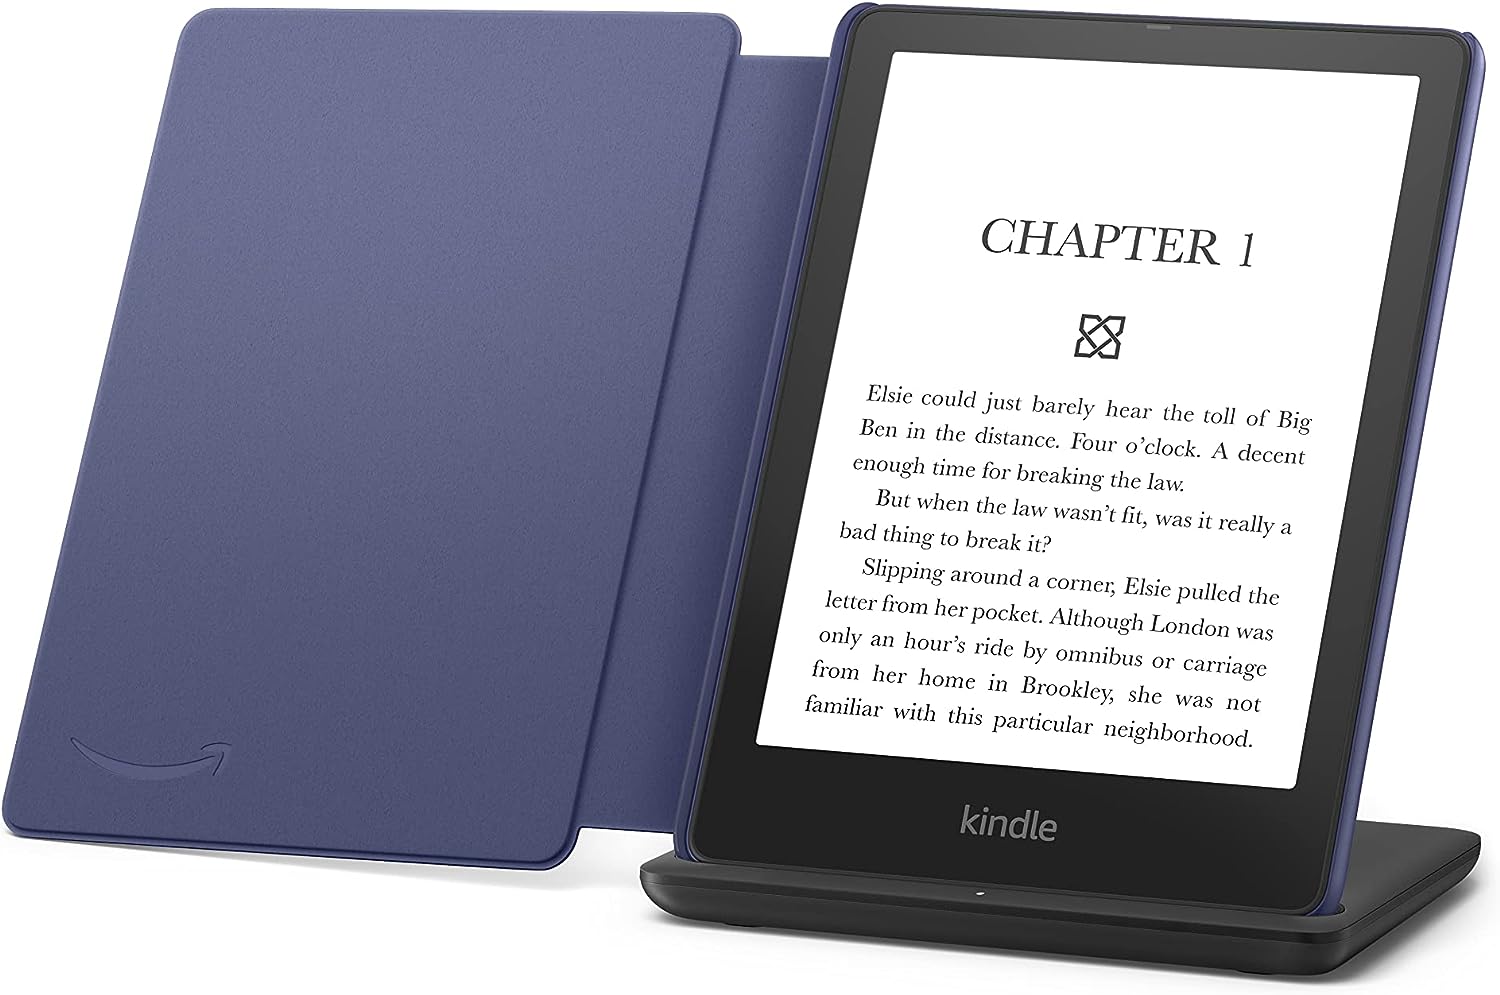 The New  Kindle Paperwhite Is a Boring Device That's Worth